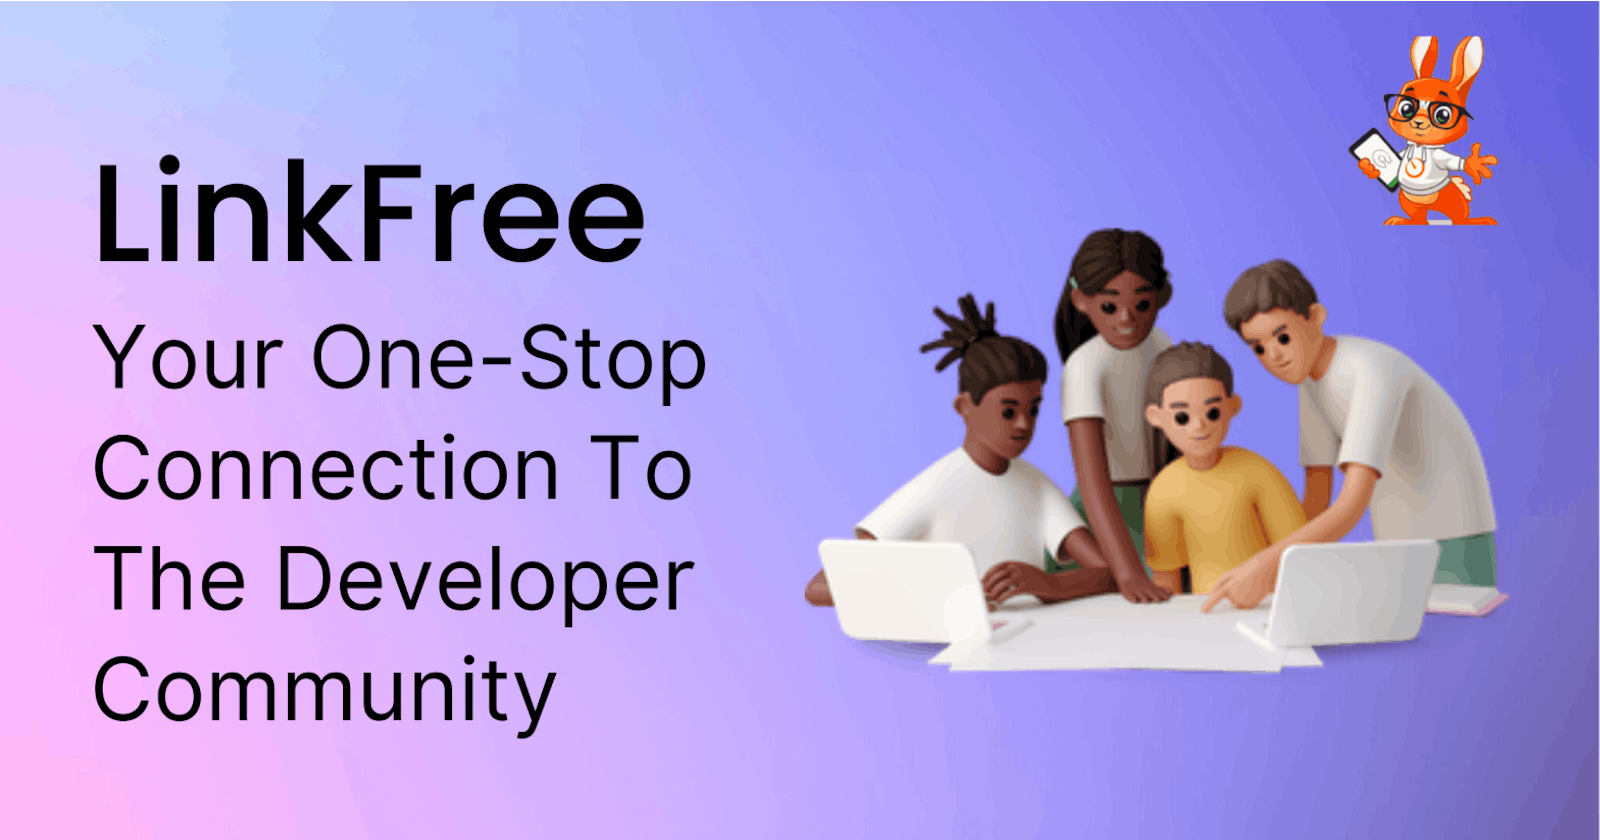 LinkFree: Your One-Stop Connection To
The Developer Community